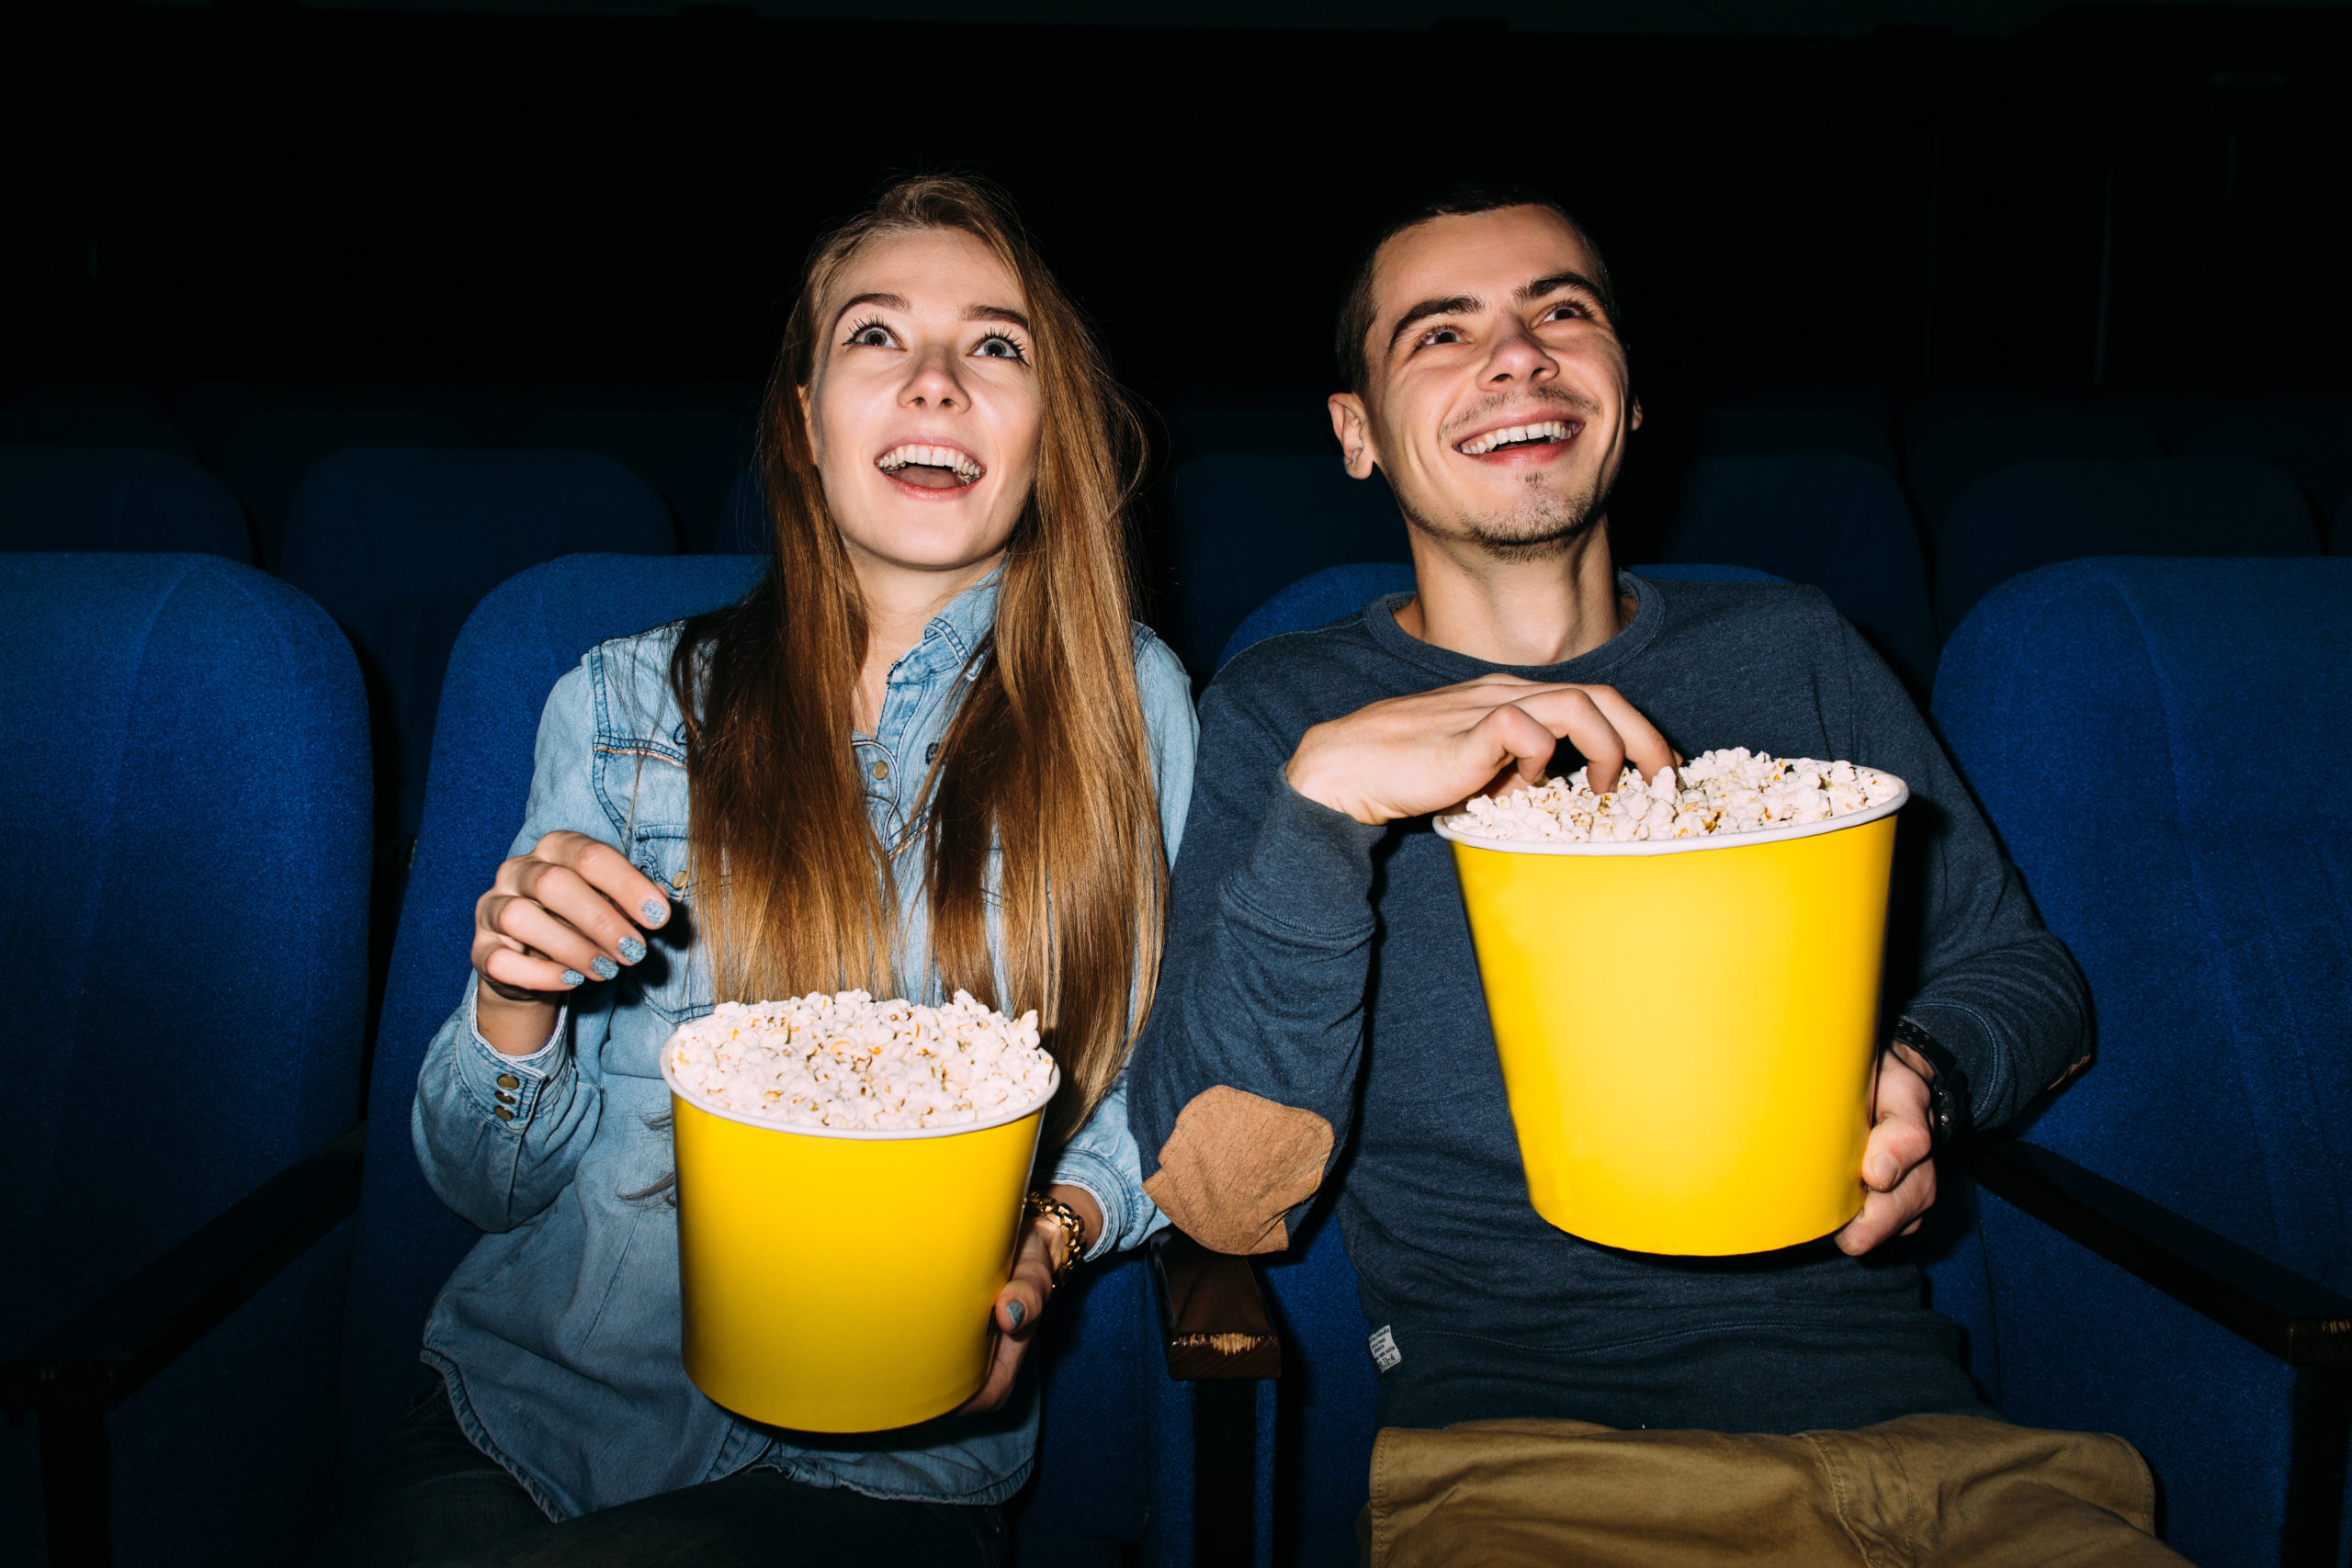 couple enjoying movie in home theater with popcorn